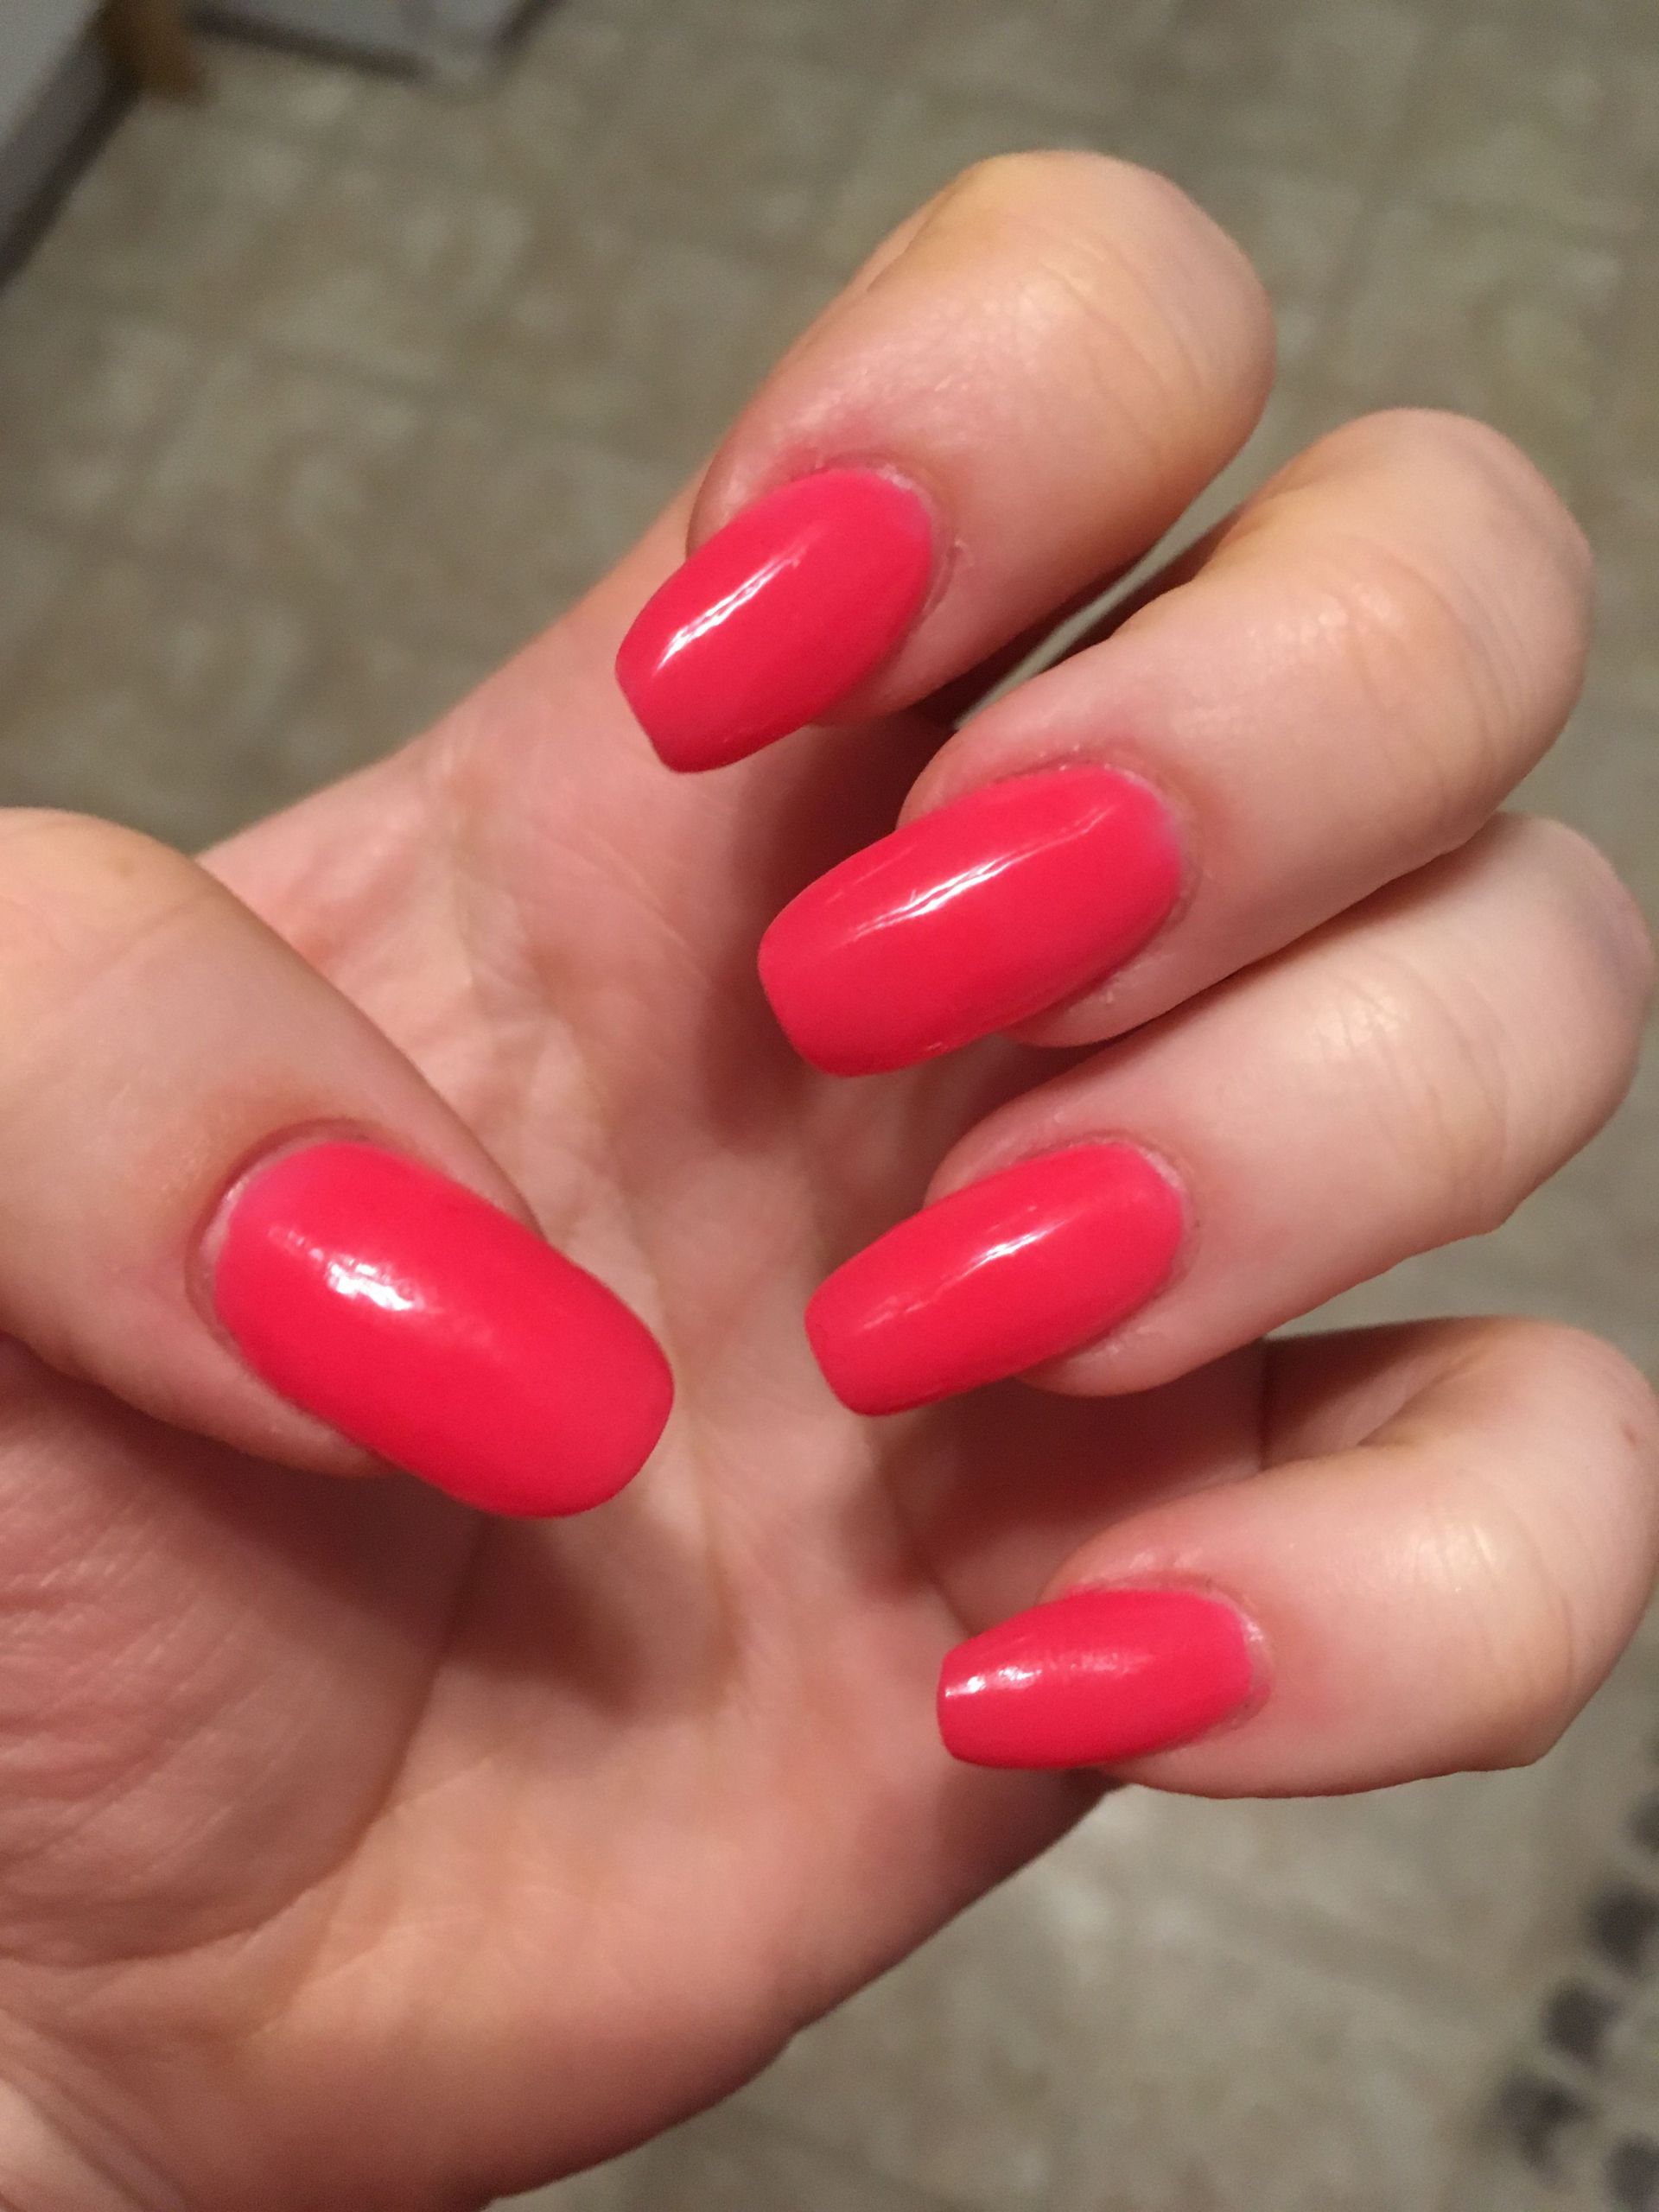 Dip Nail Colors
 ASP "Passionate Pink" from the ASP Color Acrylic Quick Dip